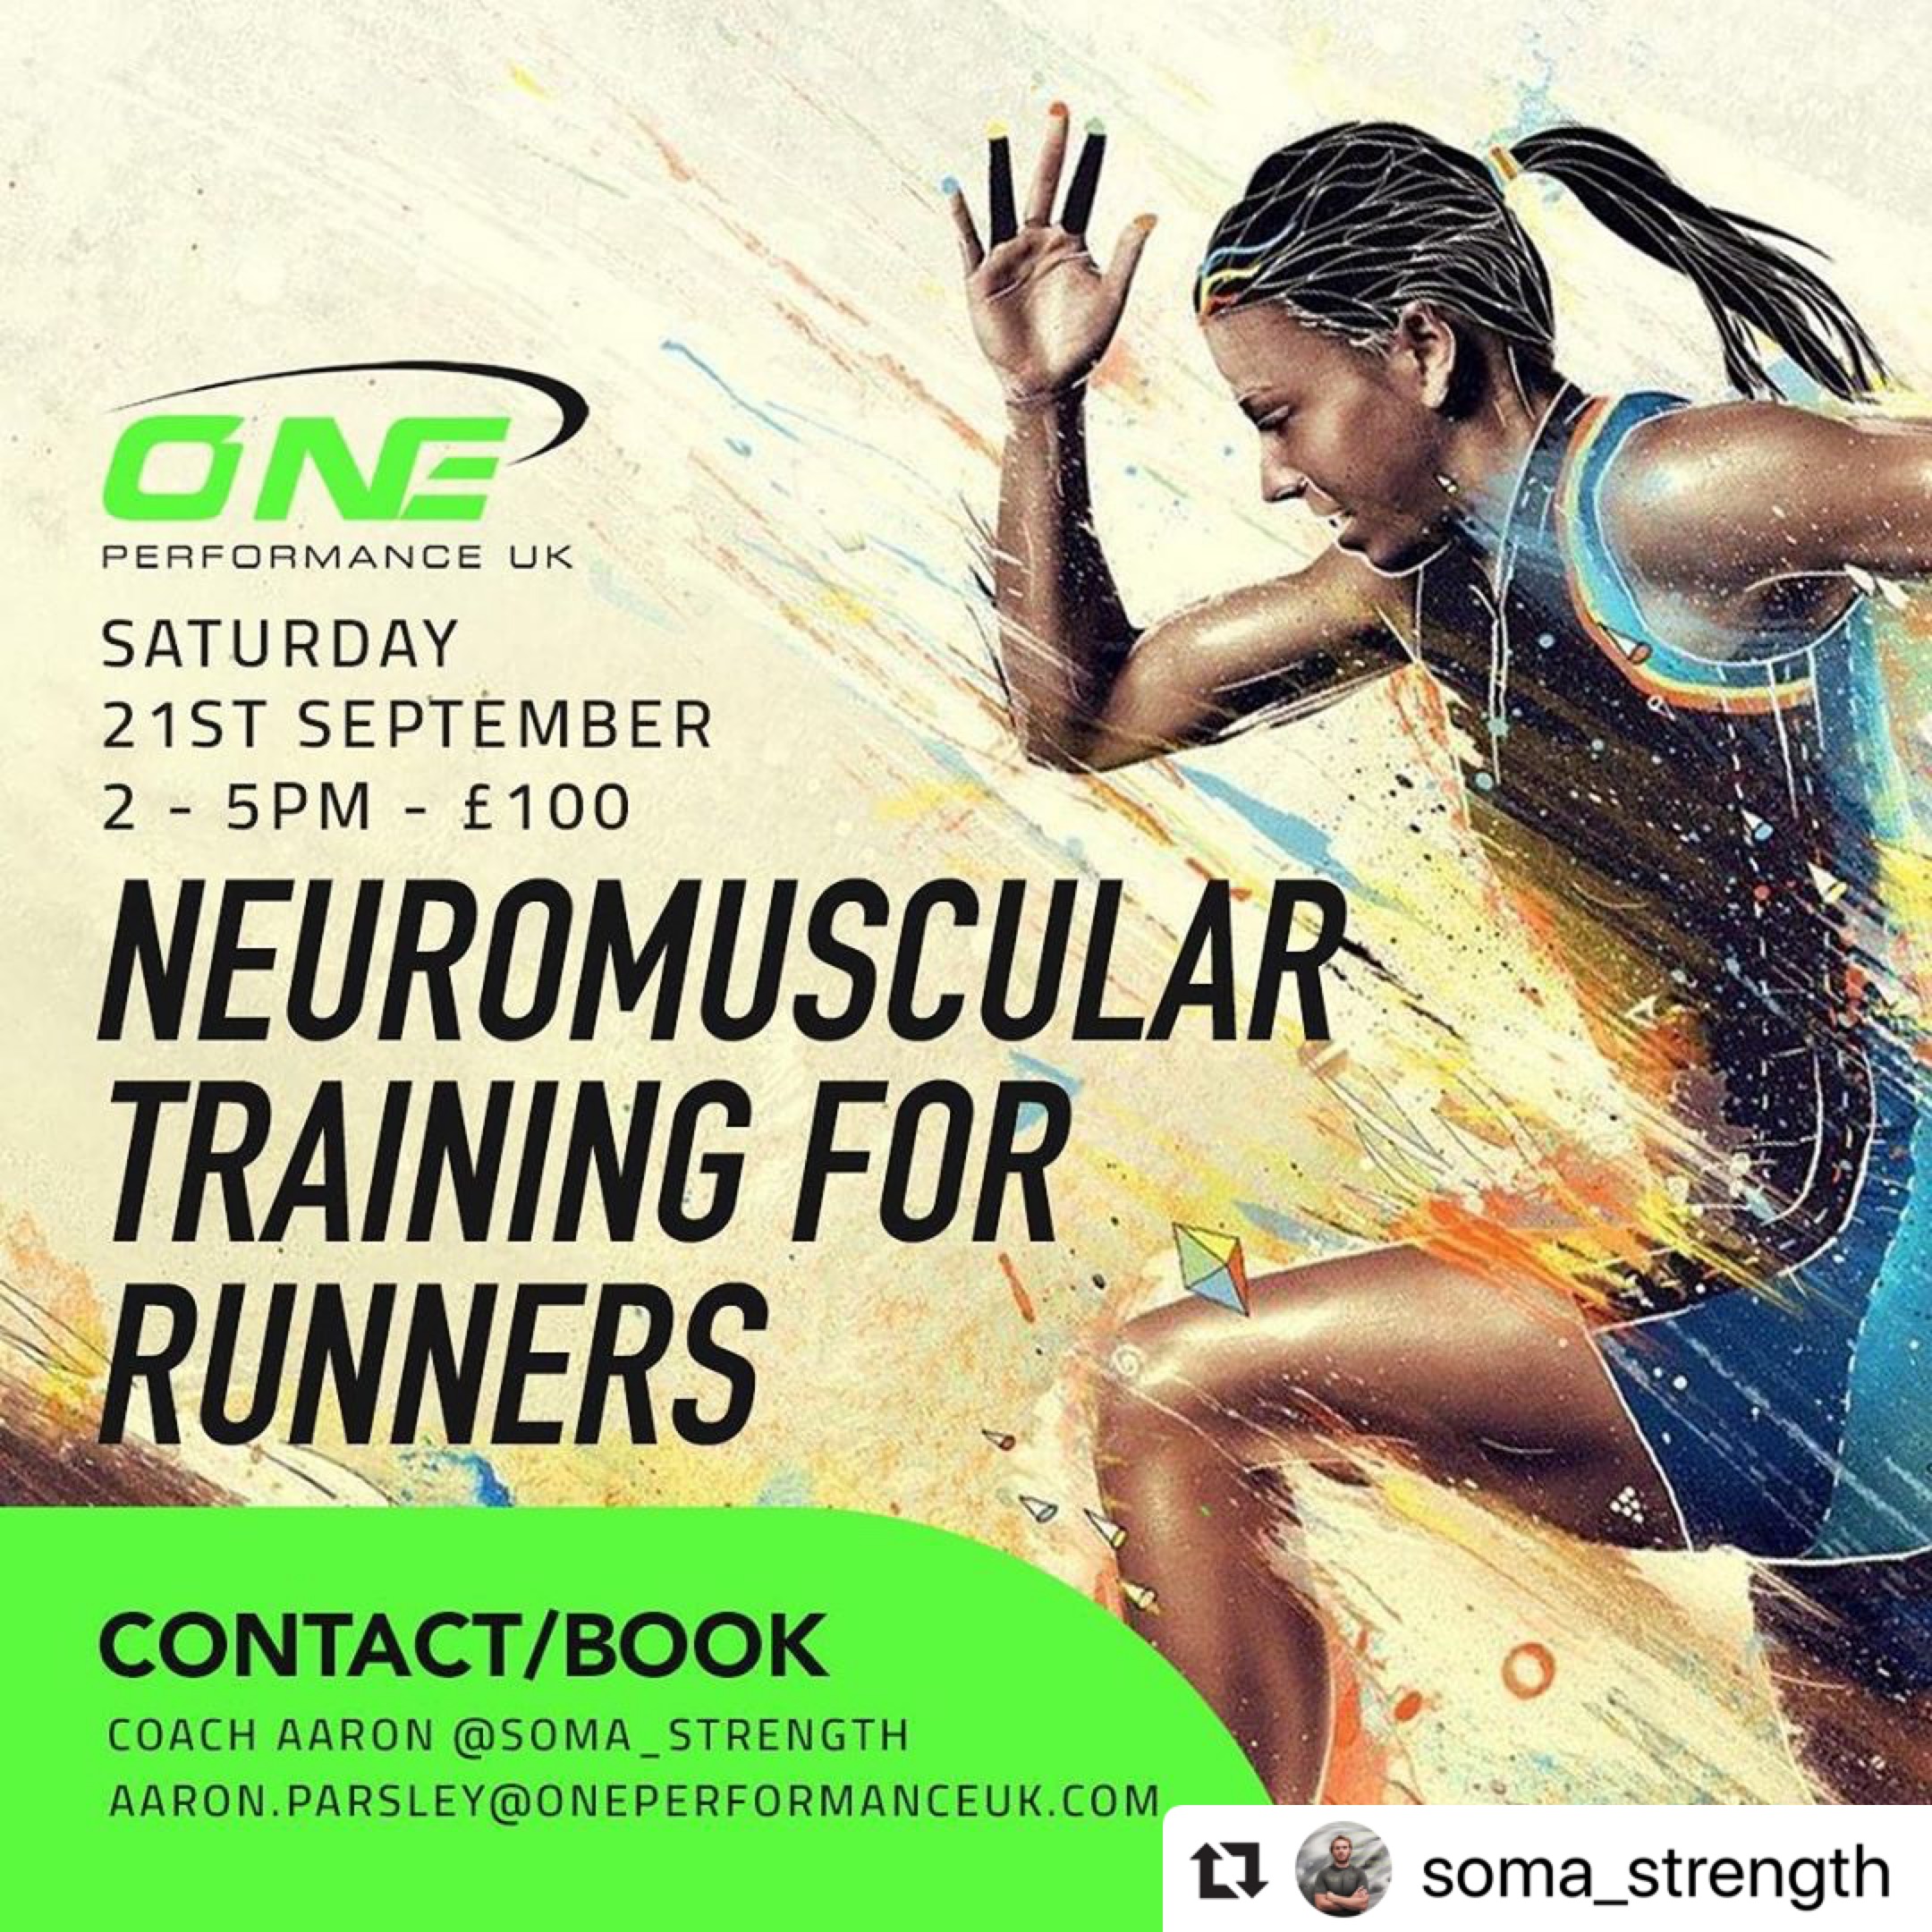 One Performance UK Run Training for Fix Events Runs in London